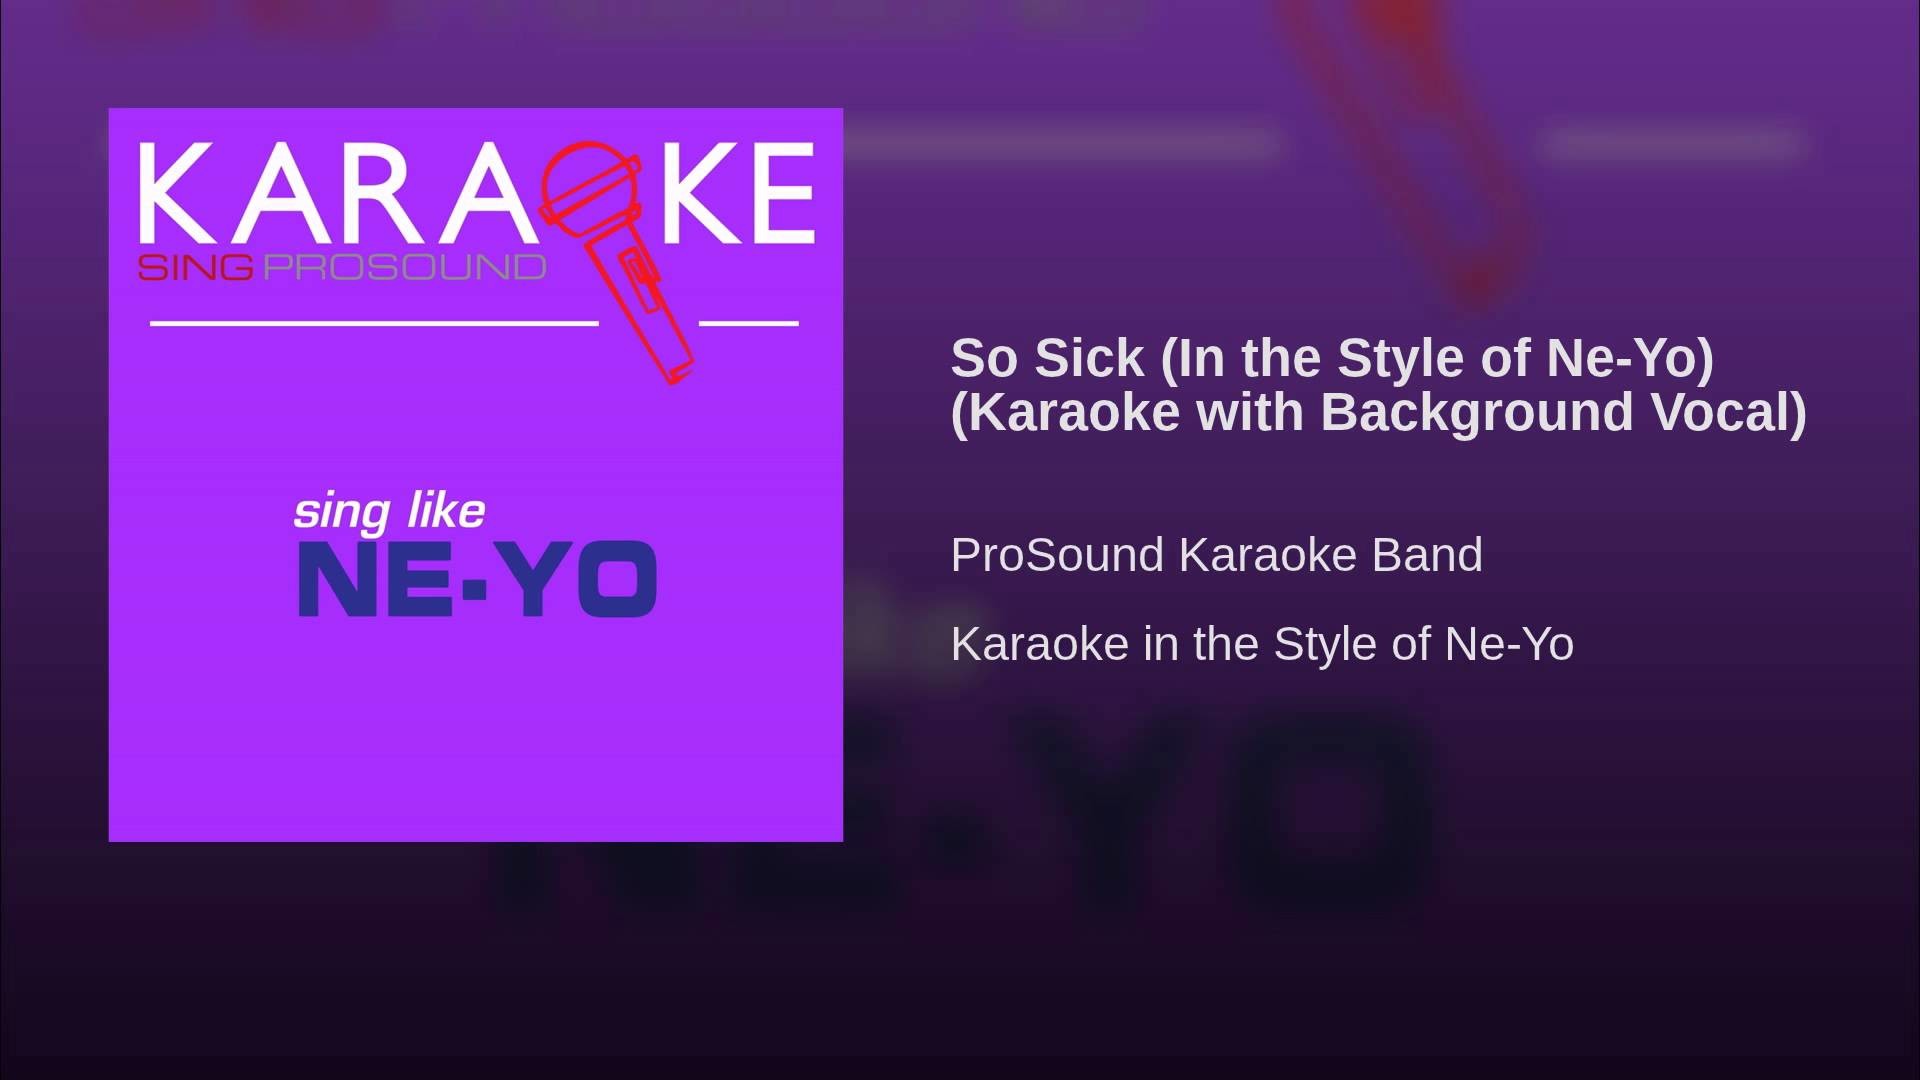 1920x1080 So Sick (In the Style of Ne-Yo) (Karaoke with Background Vocal)